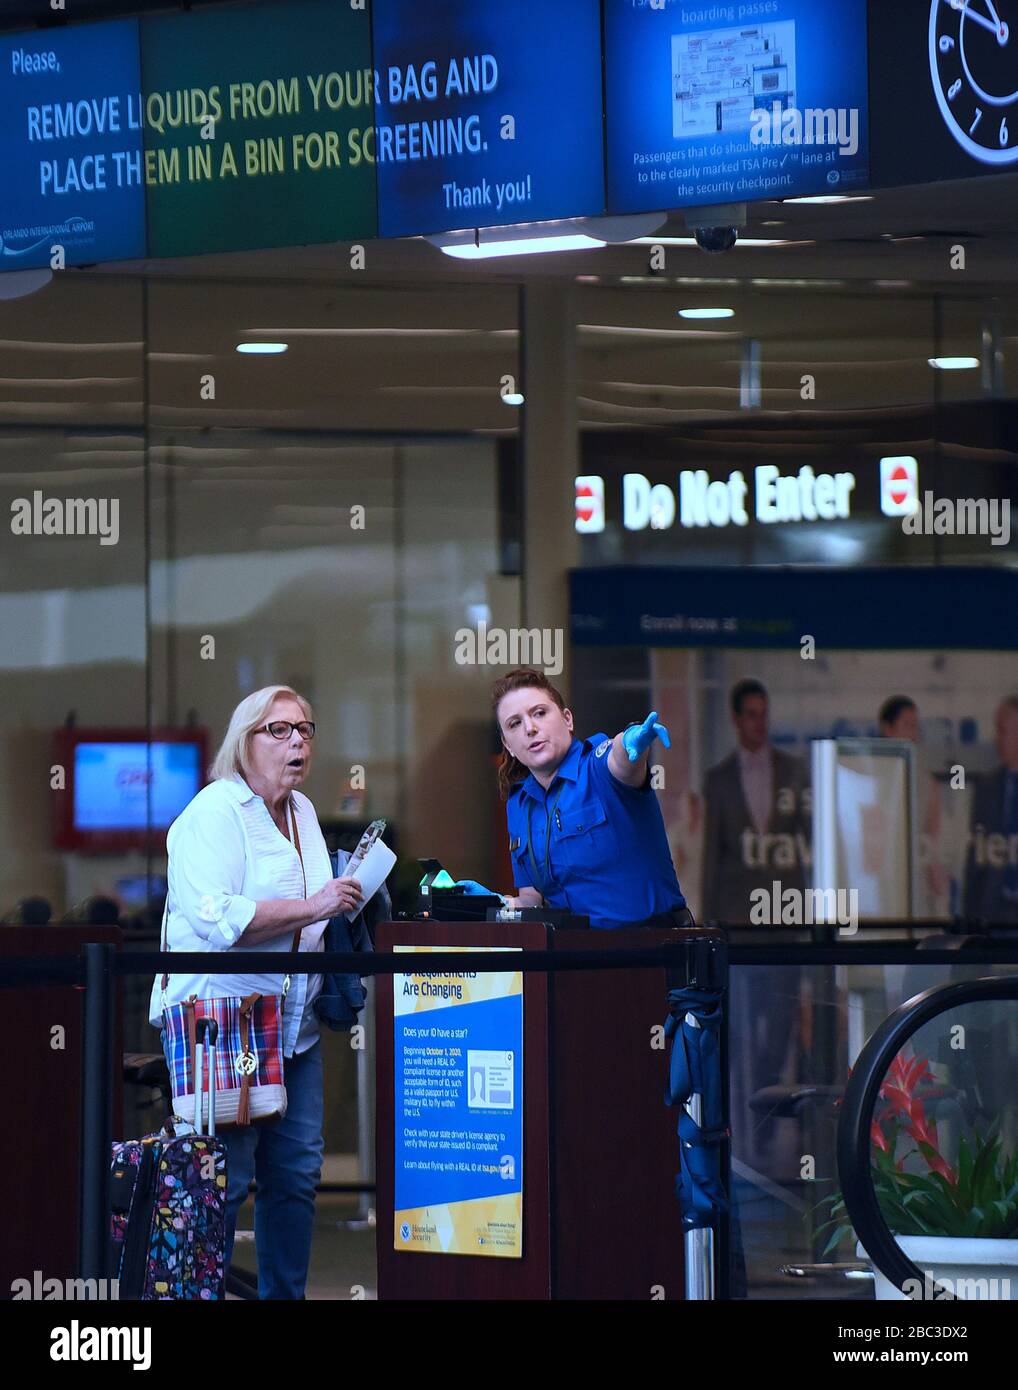 Orlando, United States. 02nd Apr, 2020. April 2, 2020 - Orlando, Florida, United States - A TSA officer wears protective gloves while screening travelers on April 2, 2020 at Orlando International Airport in Orlando, Florida. In the past 14 days across the nation, 58 TSA screening officers have tested positive for COVID-19, including 9 in Orlando. Credit: Paul Hennessy/Alamy Live News Stock Photo